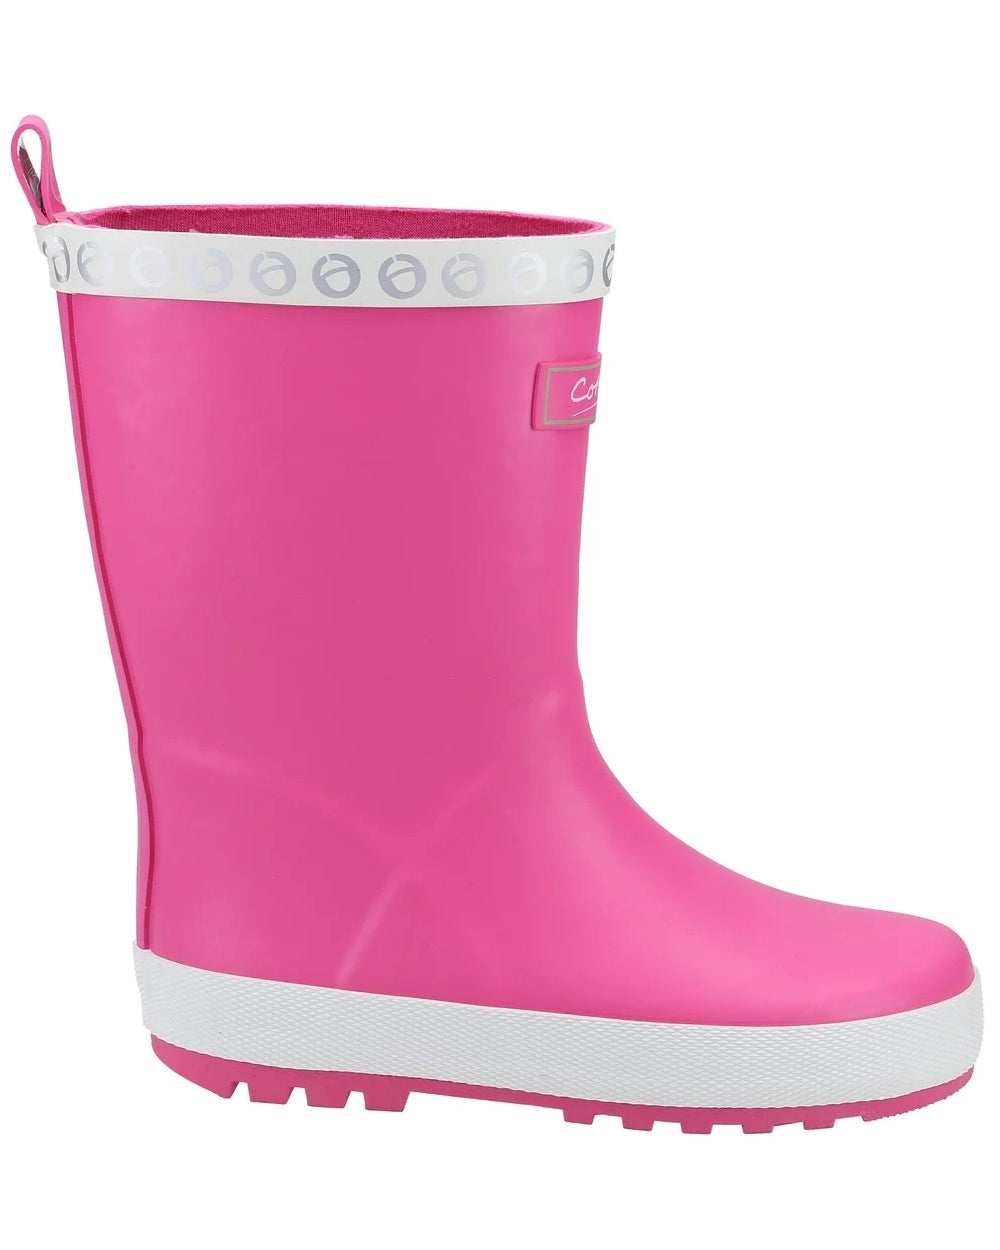 Cotswold Childrens Prestbury Wellington Boots in Pink 